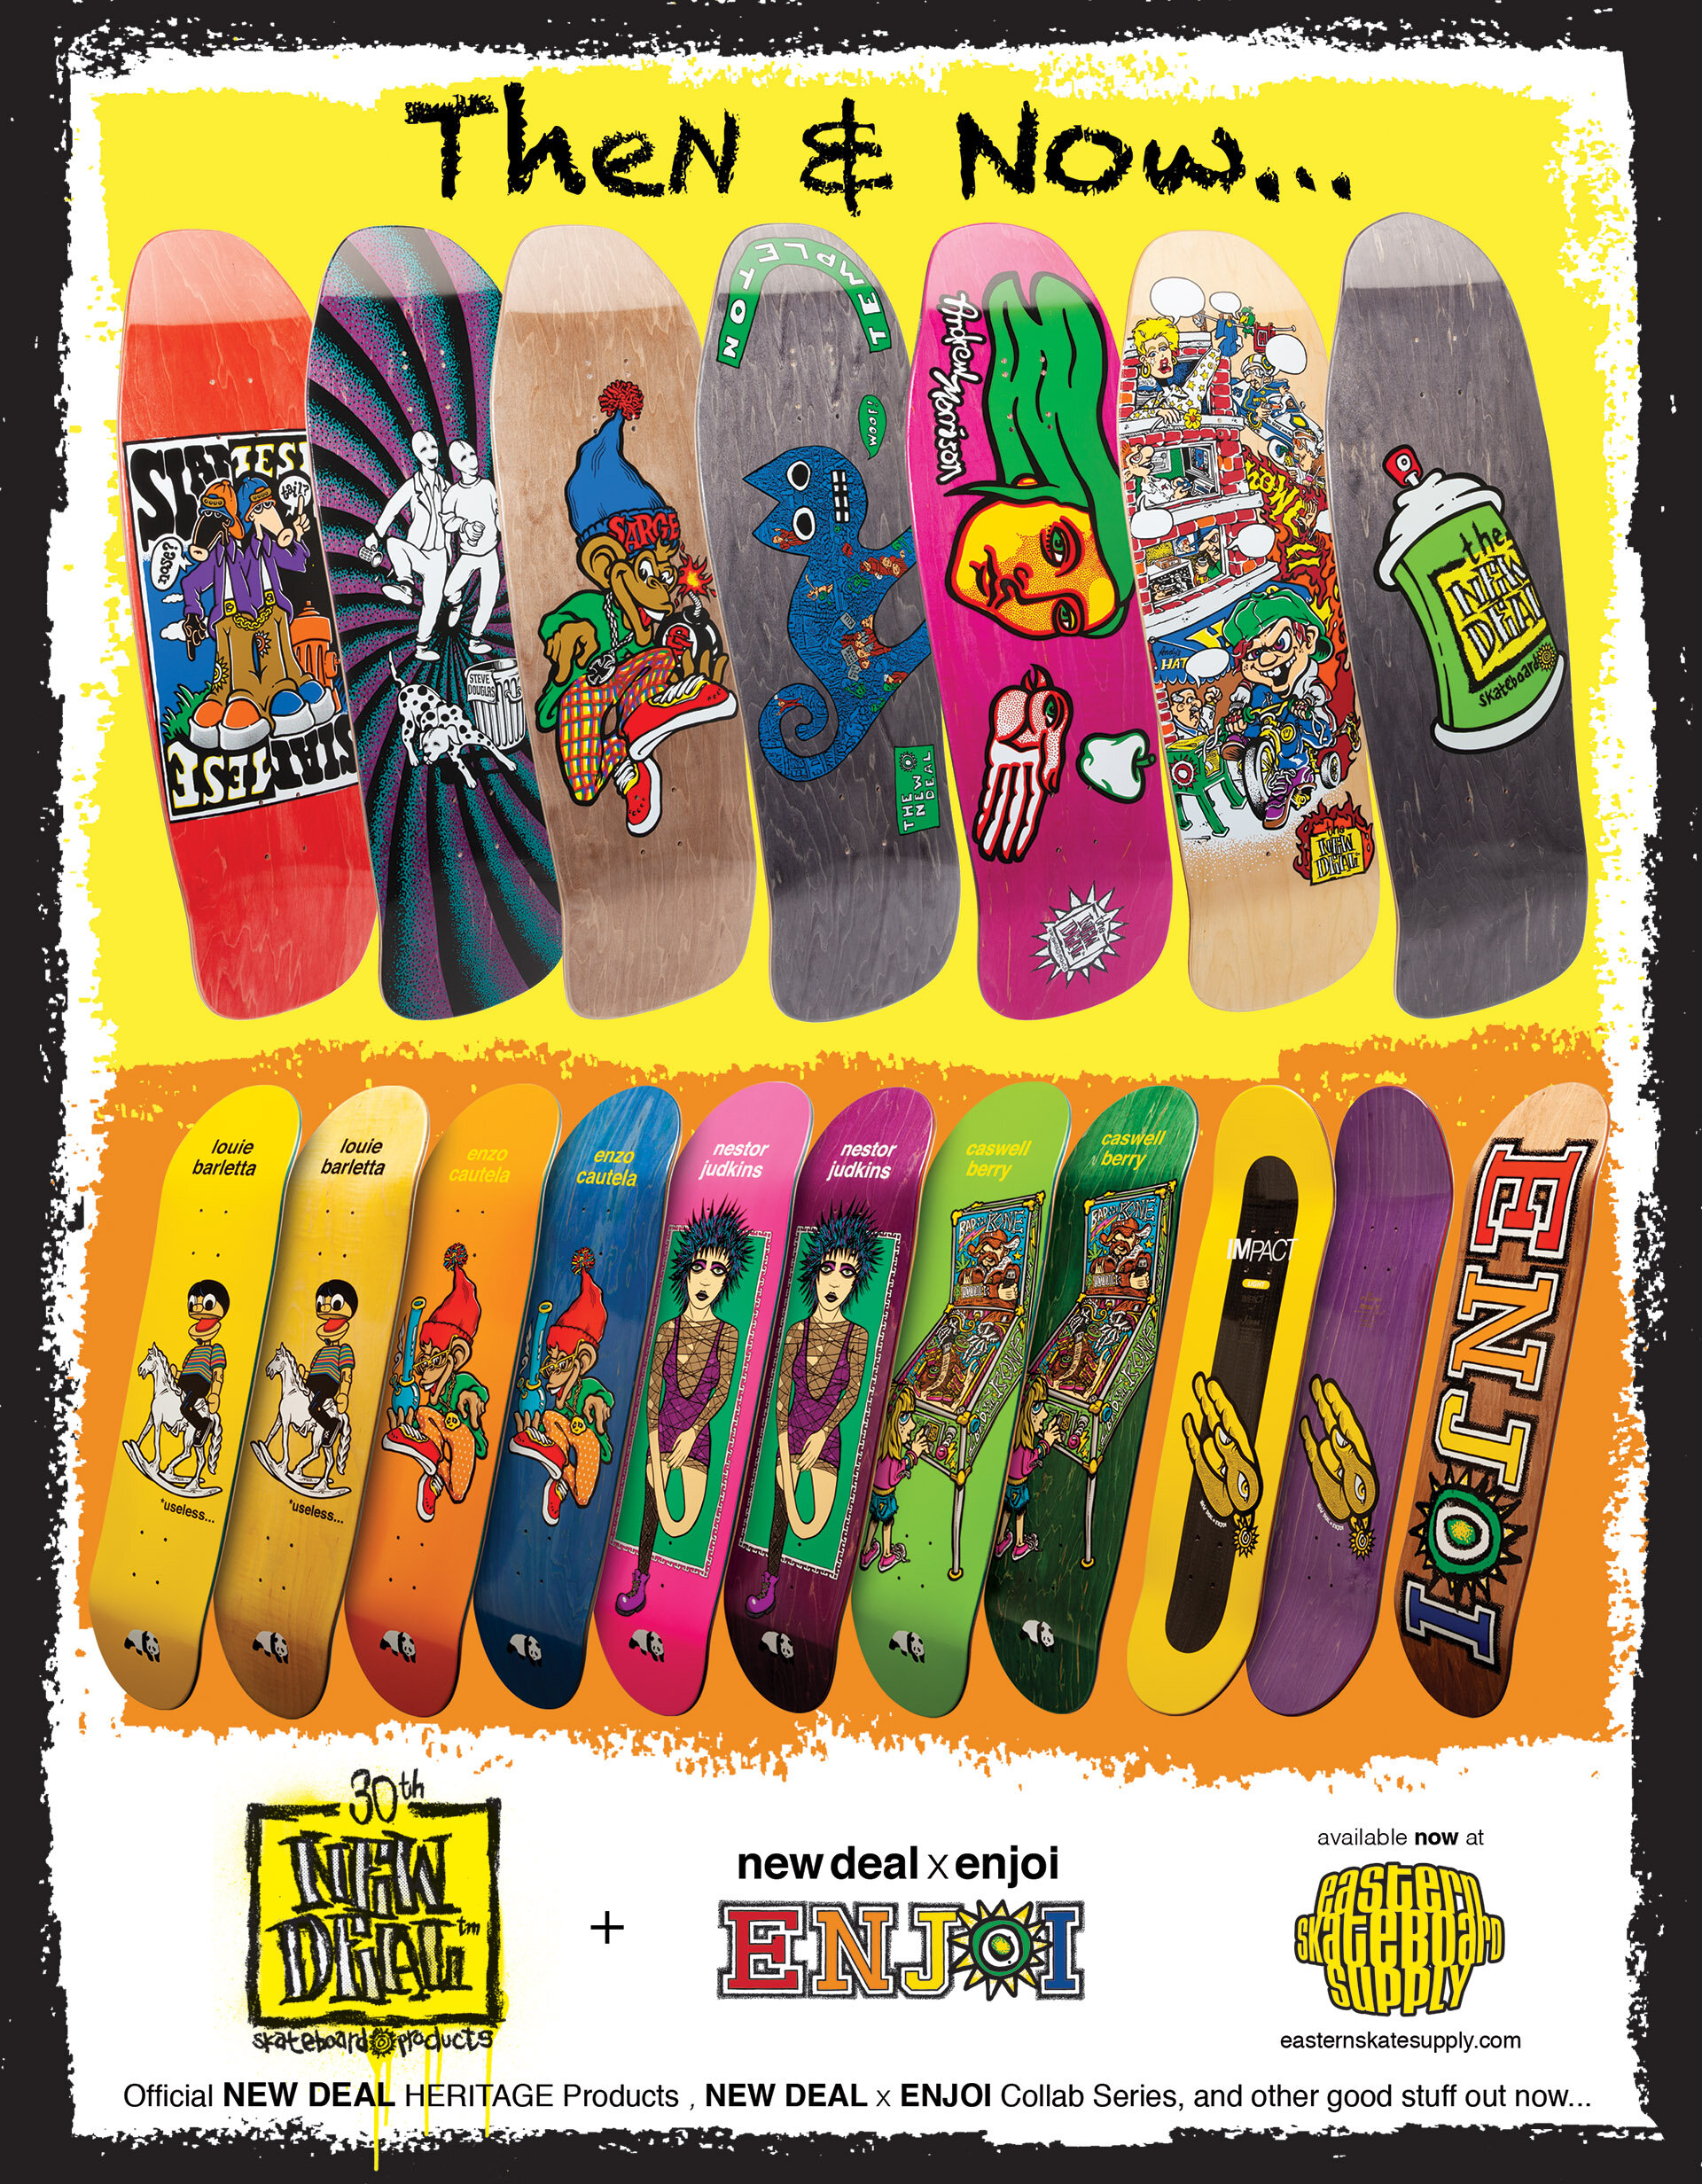  Here are my studio shots used for an ad in  Thrasher Magazine  by  Eastern Skateboard Supply . 